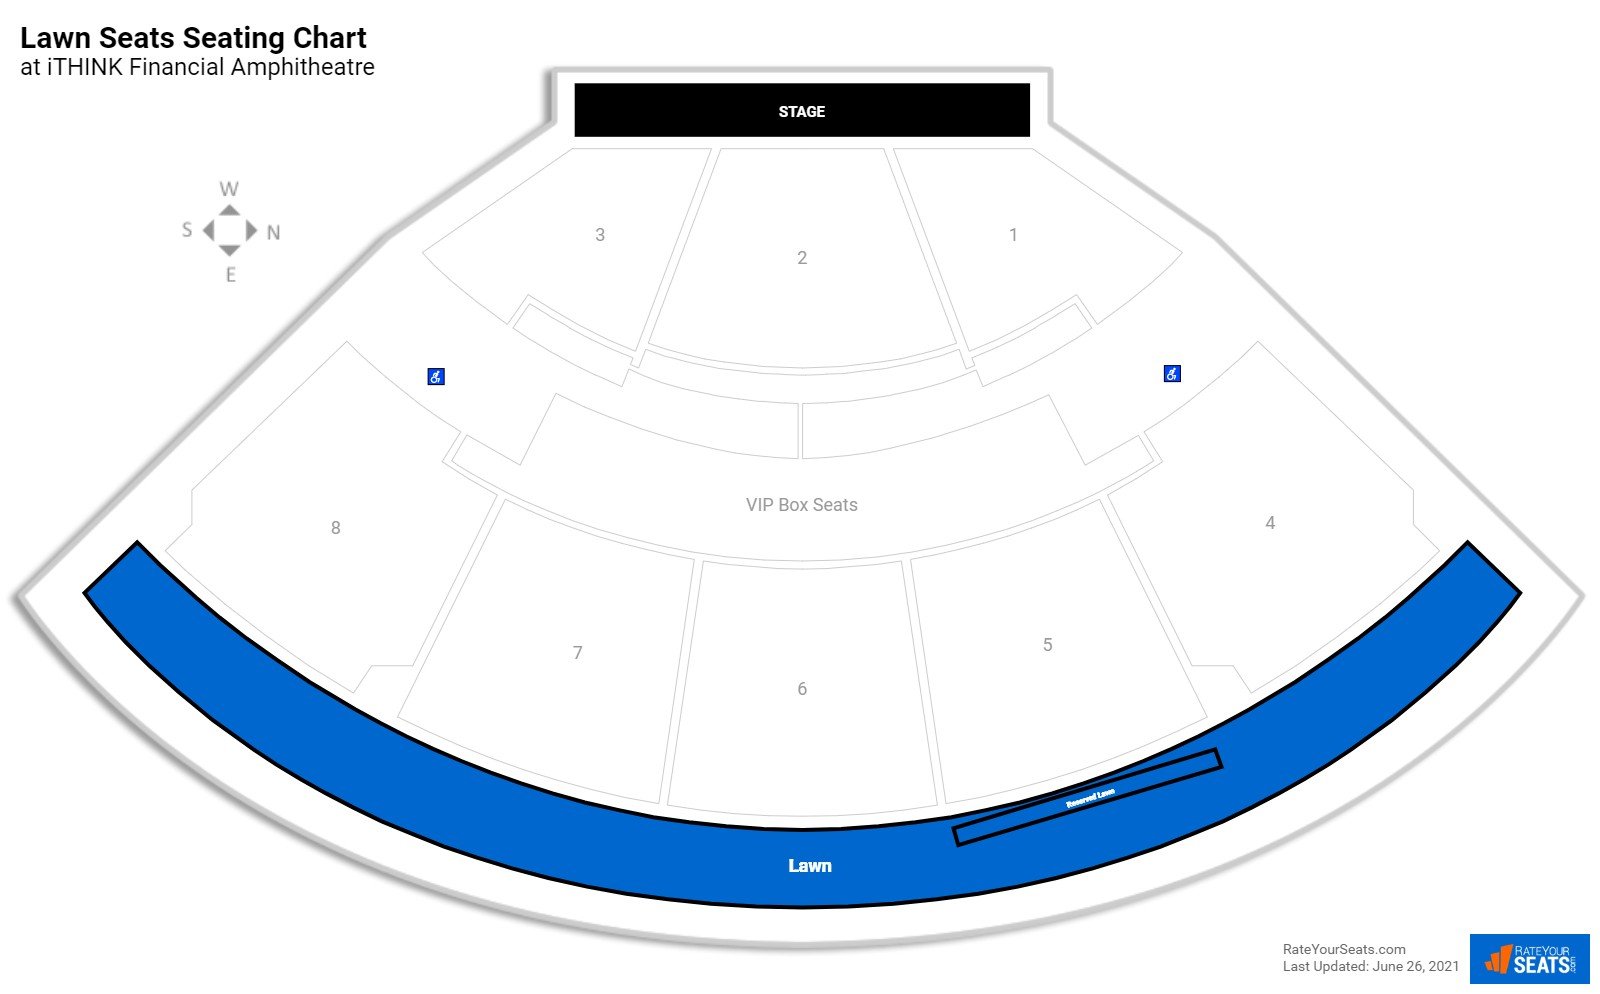 Concert Lawn Seats Seating Chart at iTHINK Financial Amphitheatre